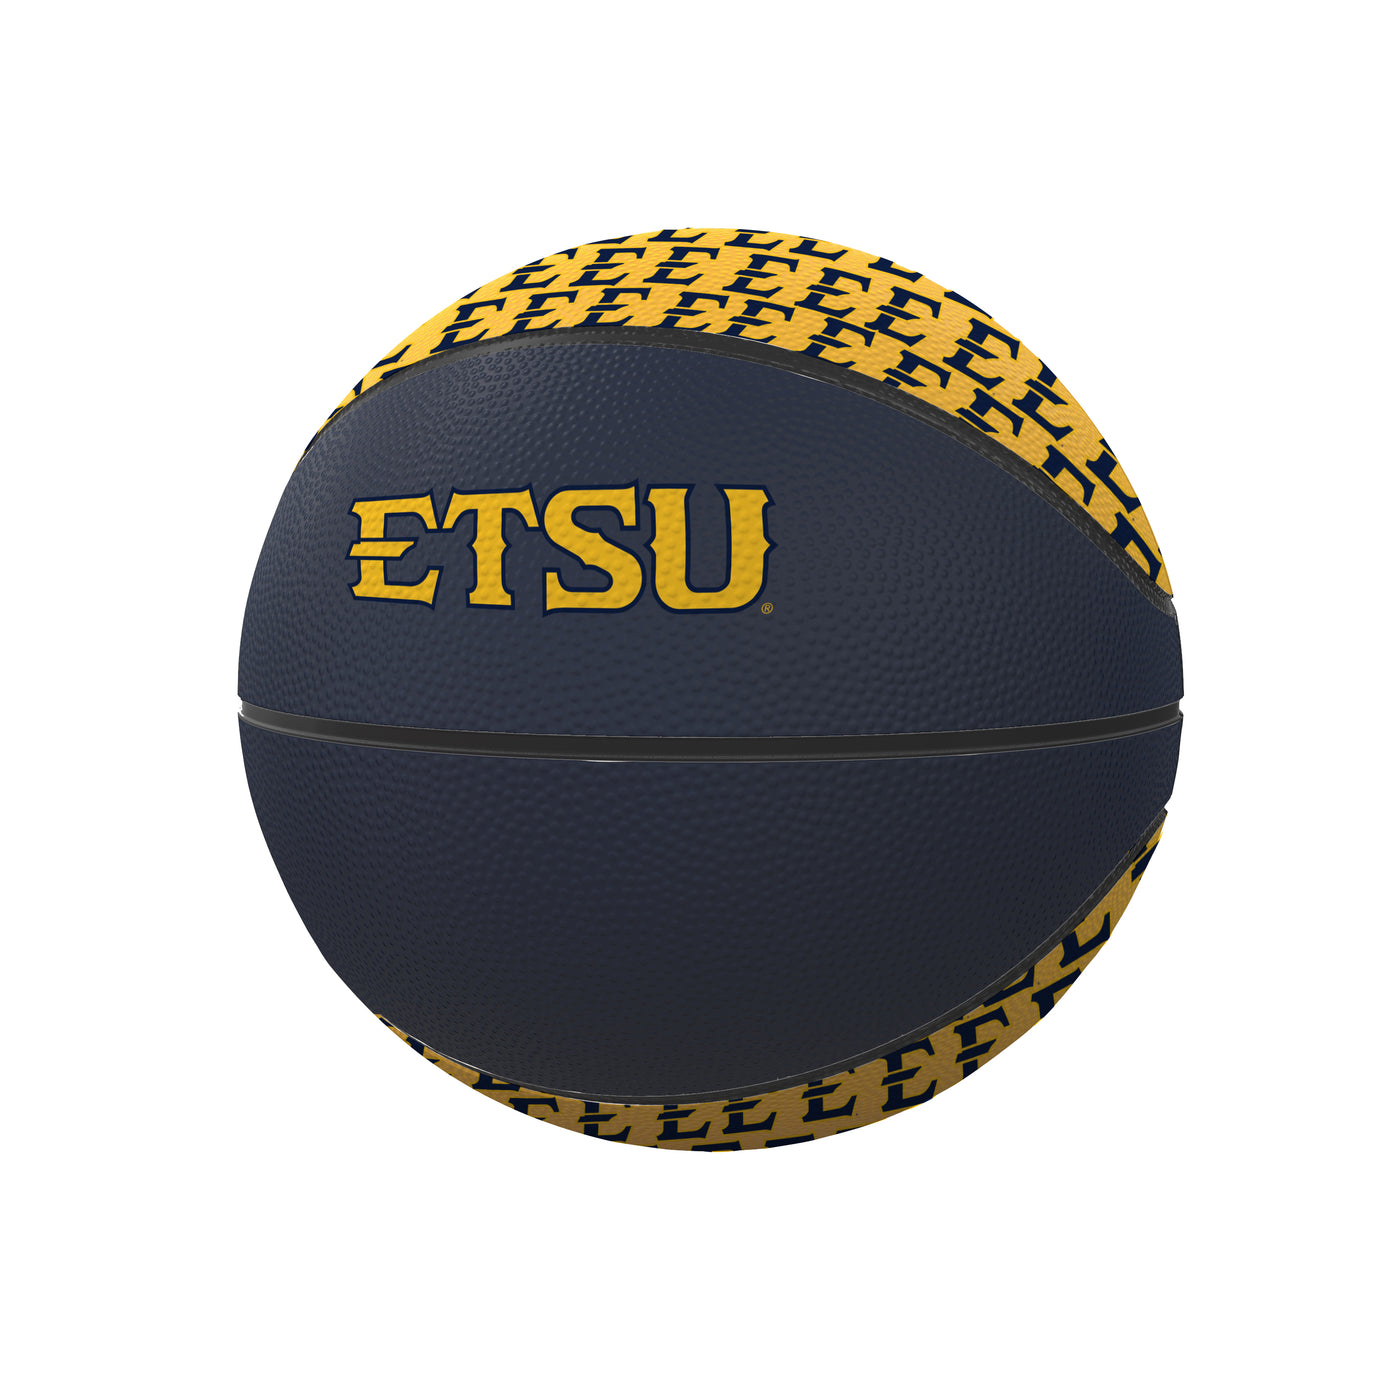 East TN State Mini Size Rubber Basketball